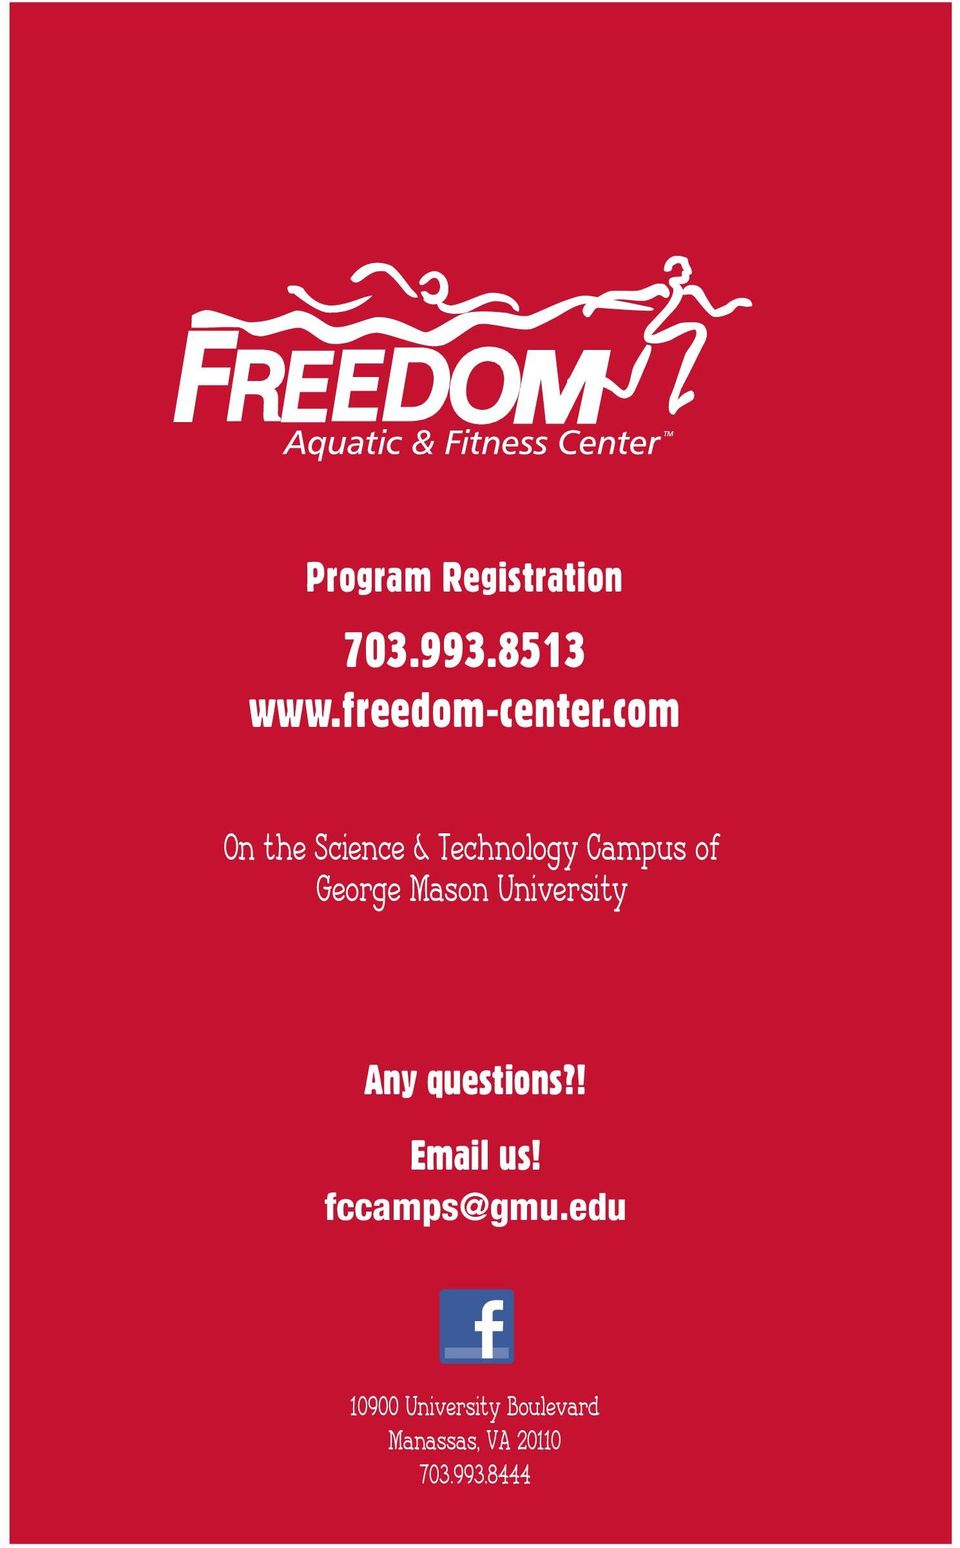 University Any questions?! Email us! fccamps@gmu.